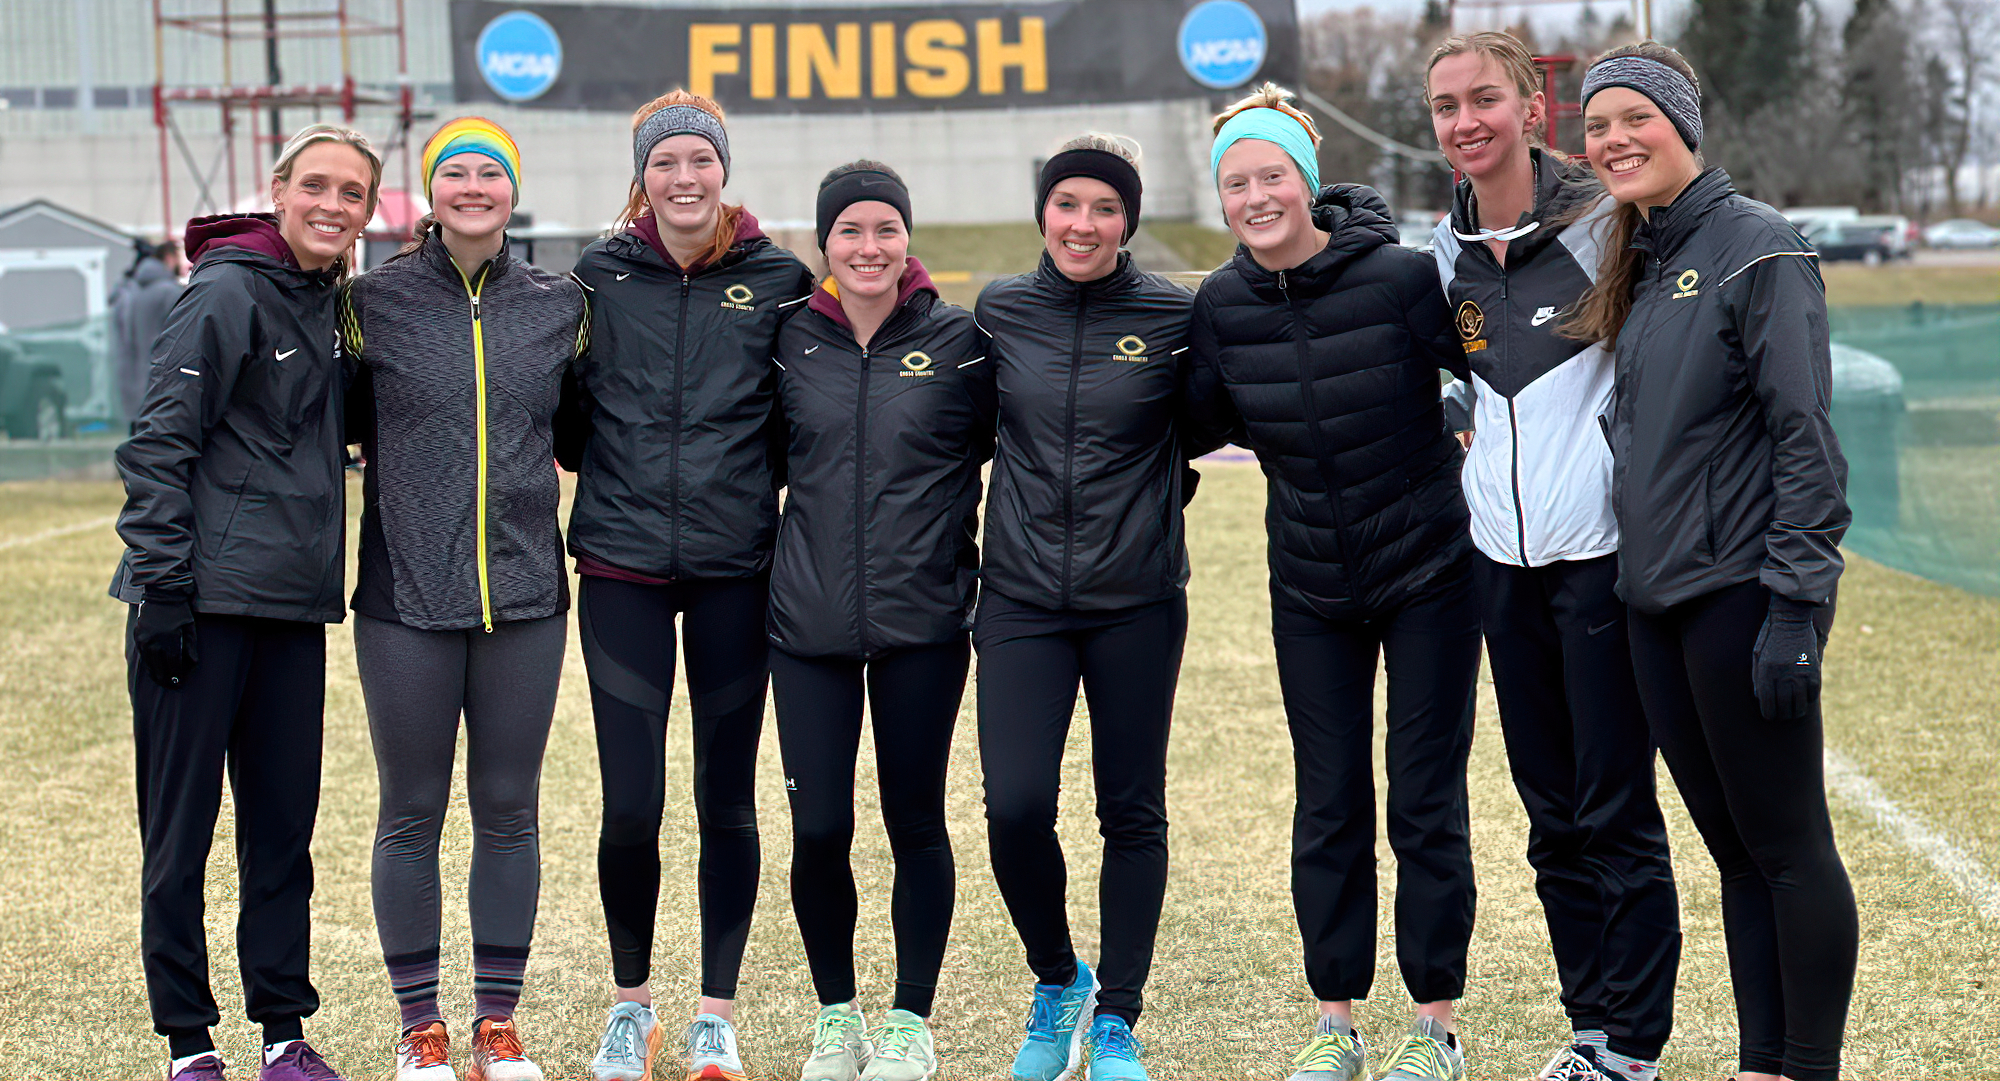 The eight members of the Cobber team that competed at the NCAA North Region Meet pose for a picture after the completion of the race.